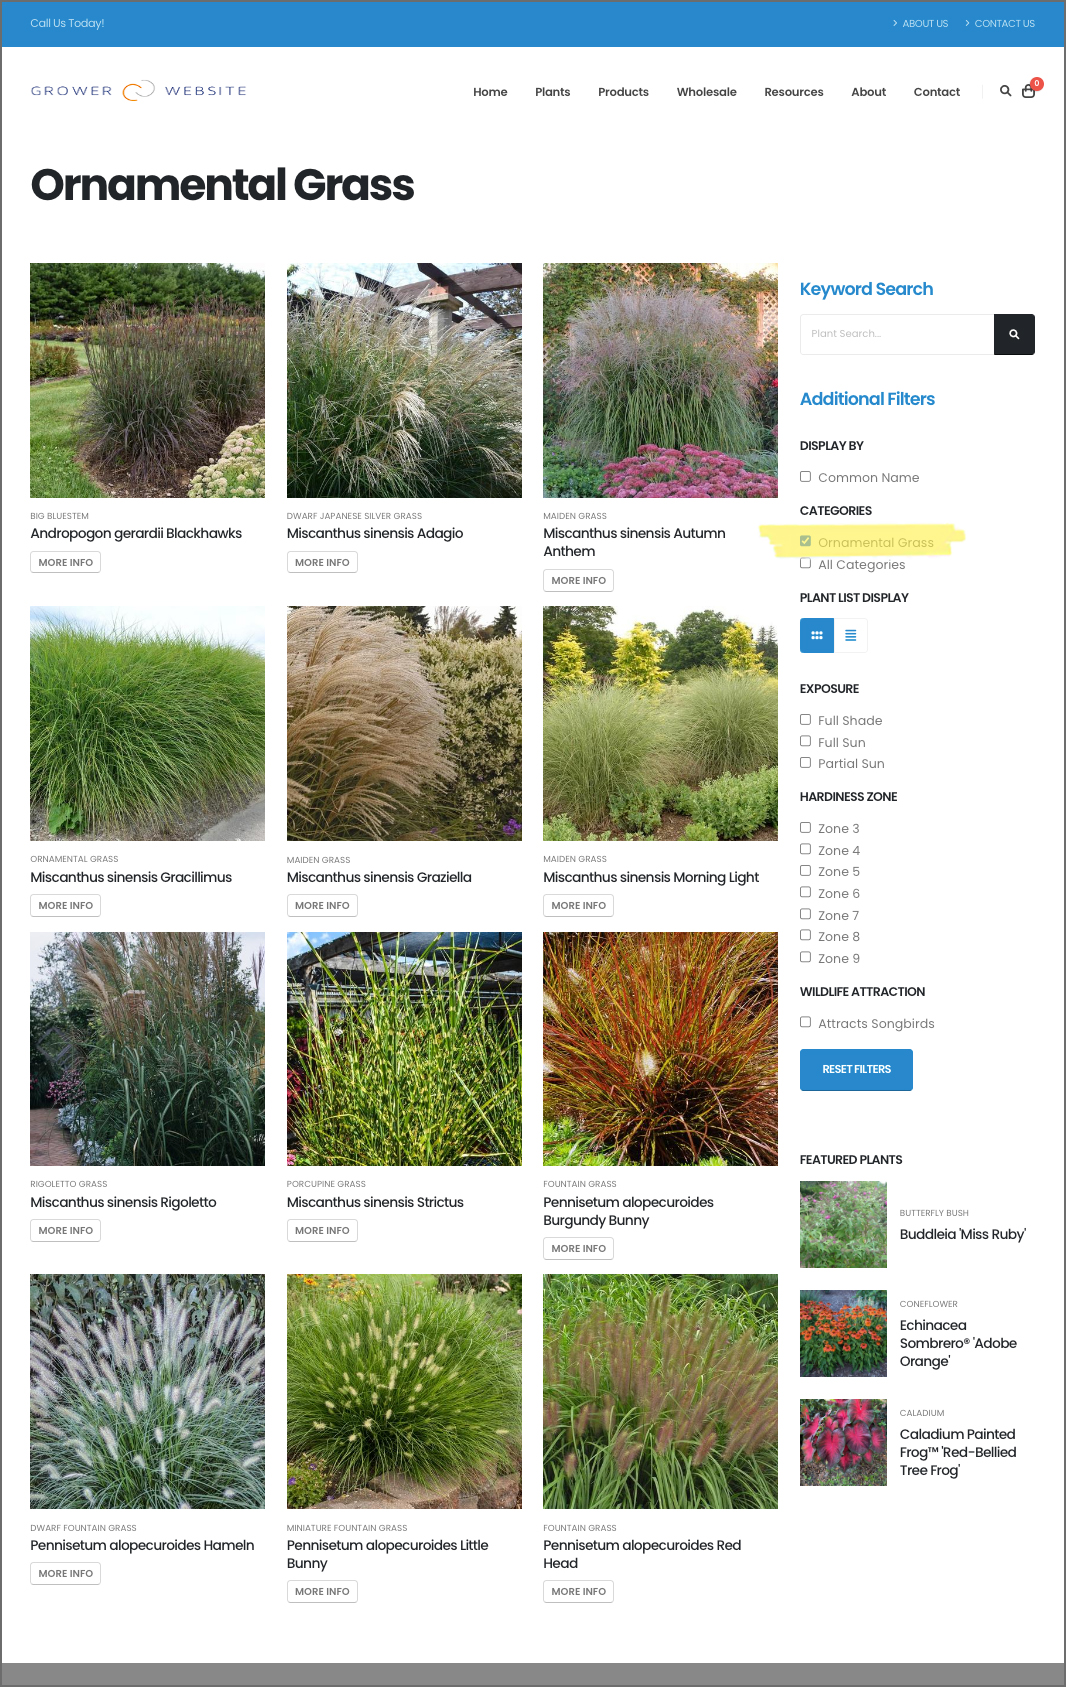 On the GENERAL tab of the Plant Editor, you can assign a plant record to one or more categories. 